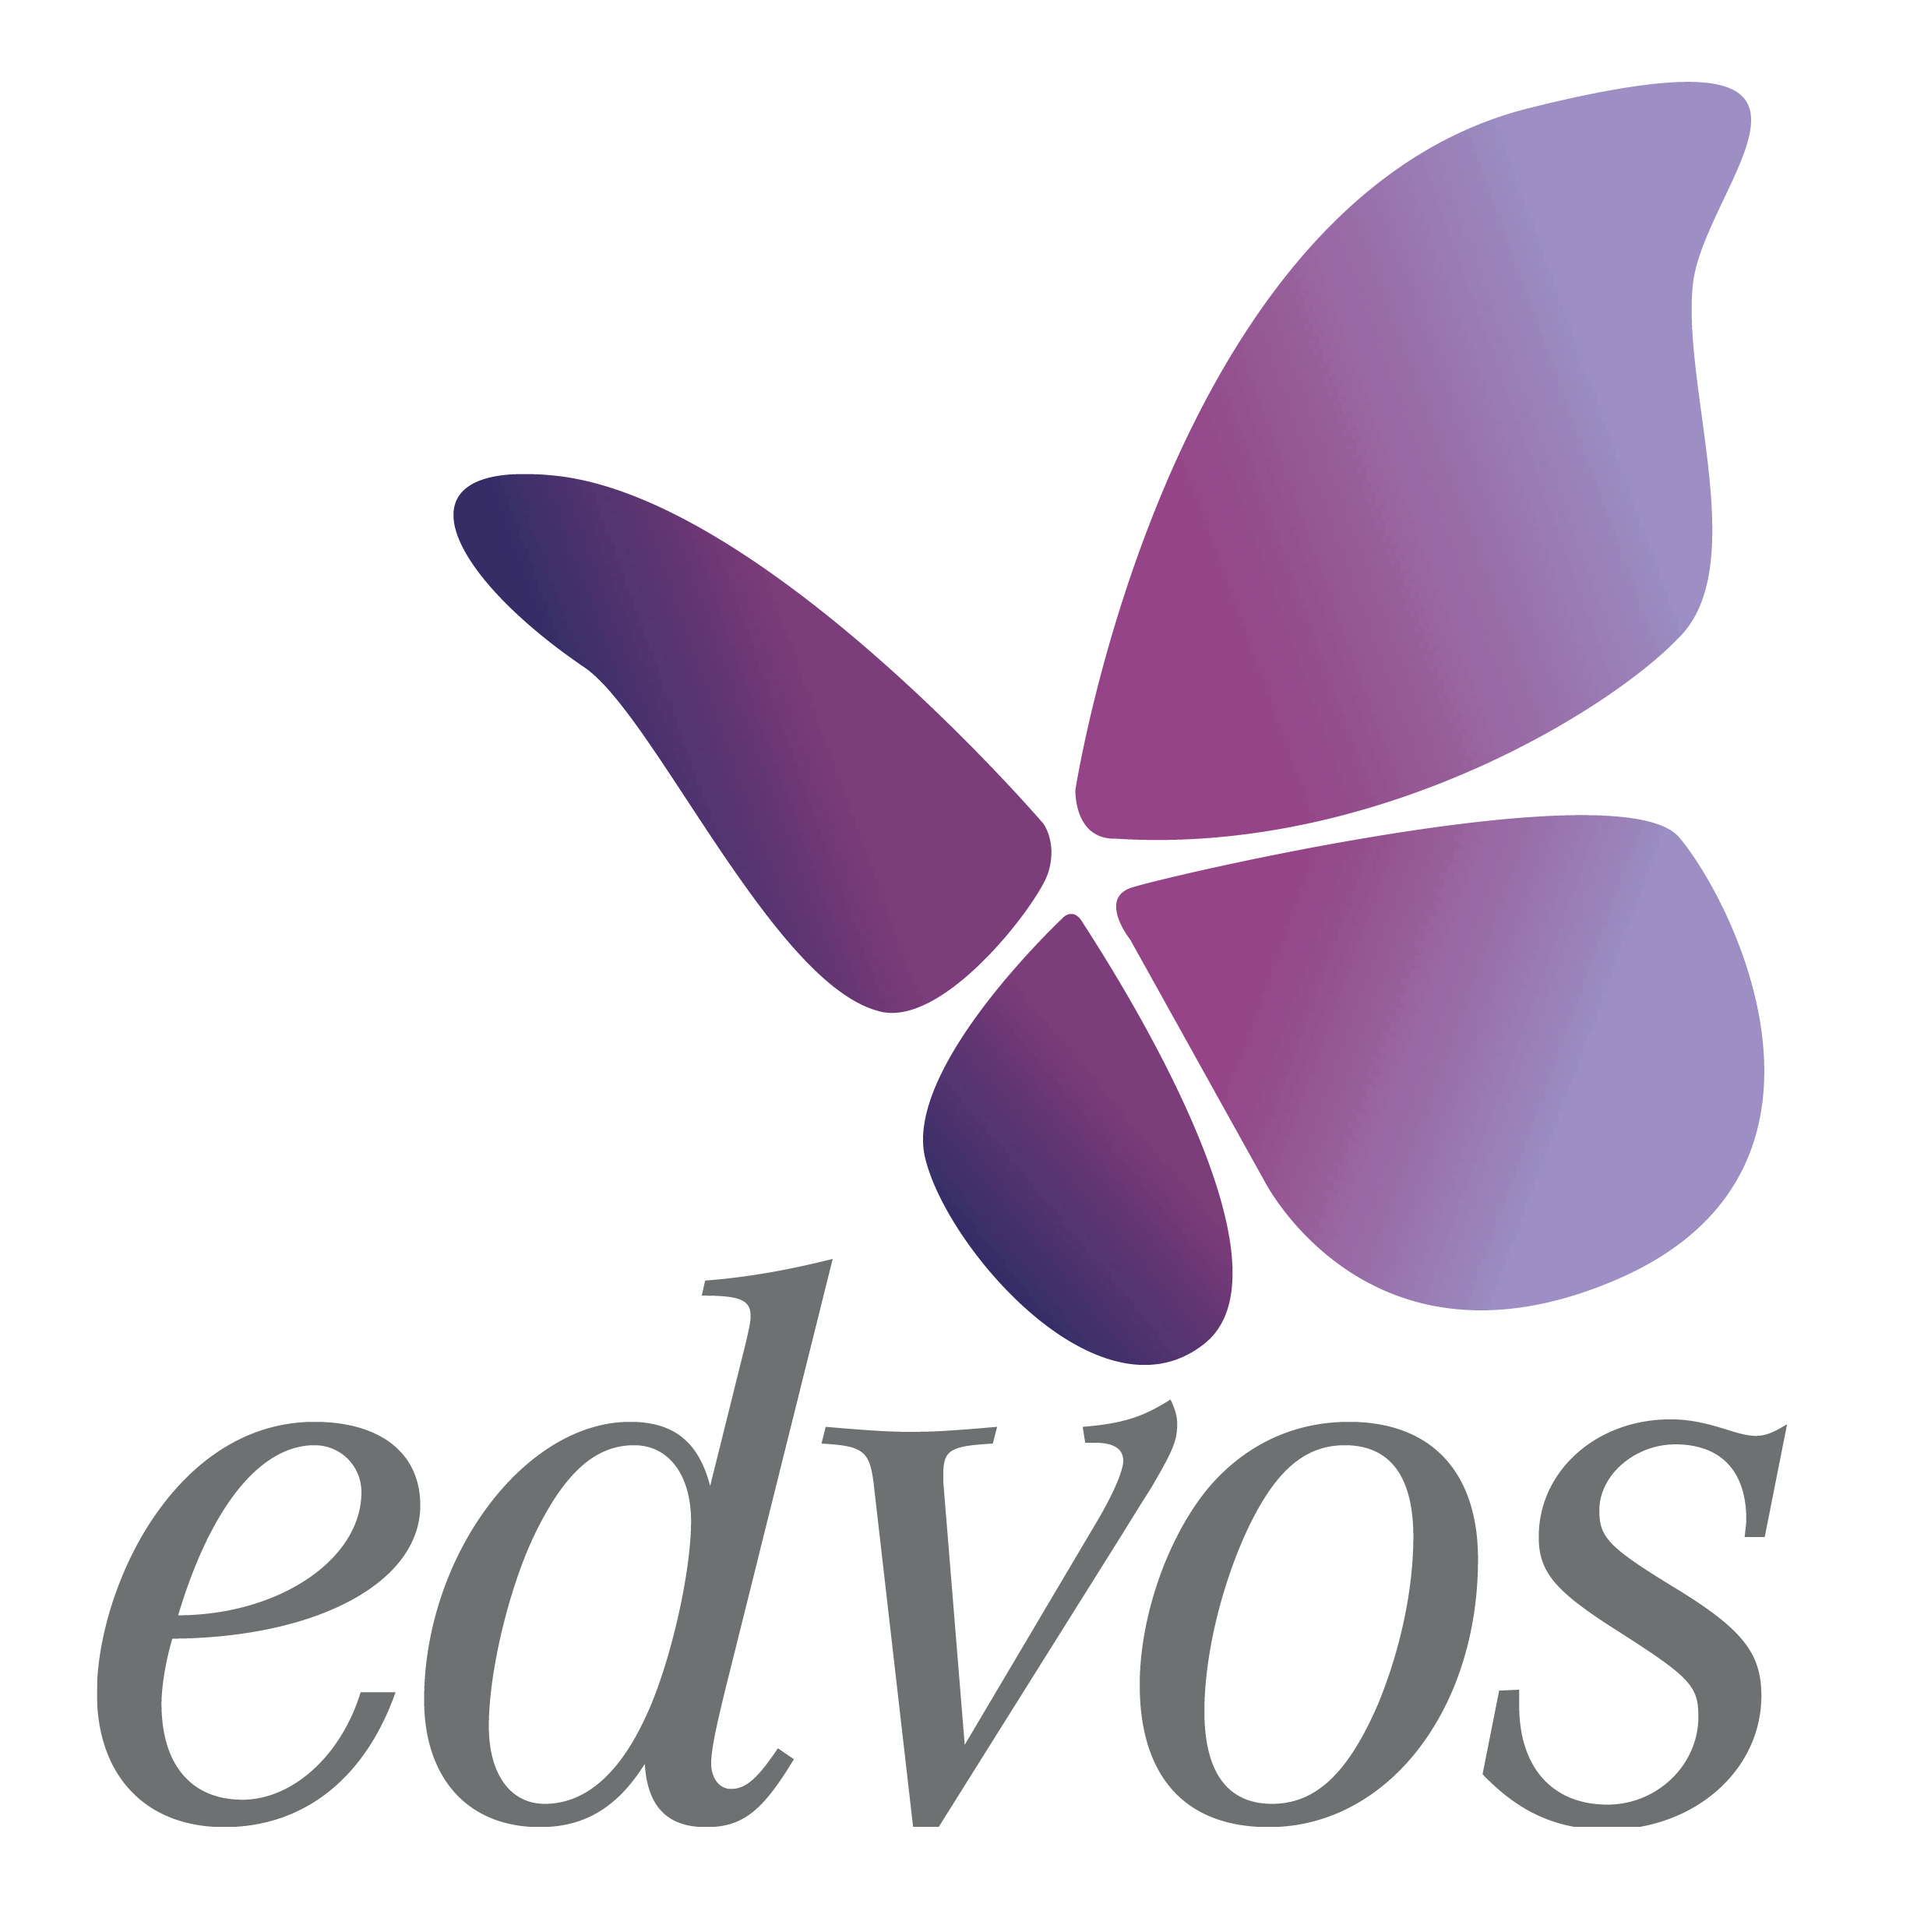 Data Entry Administration Support Officer at EDVOS - Jobs